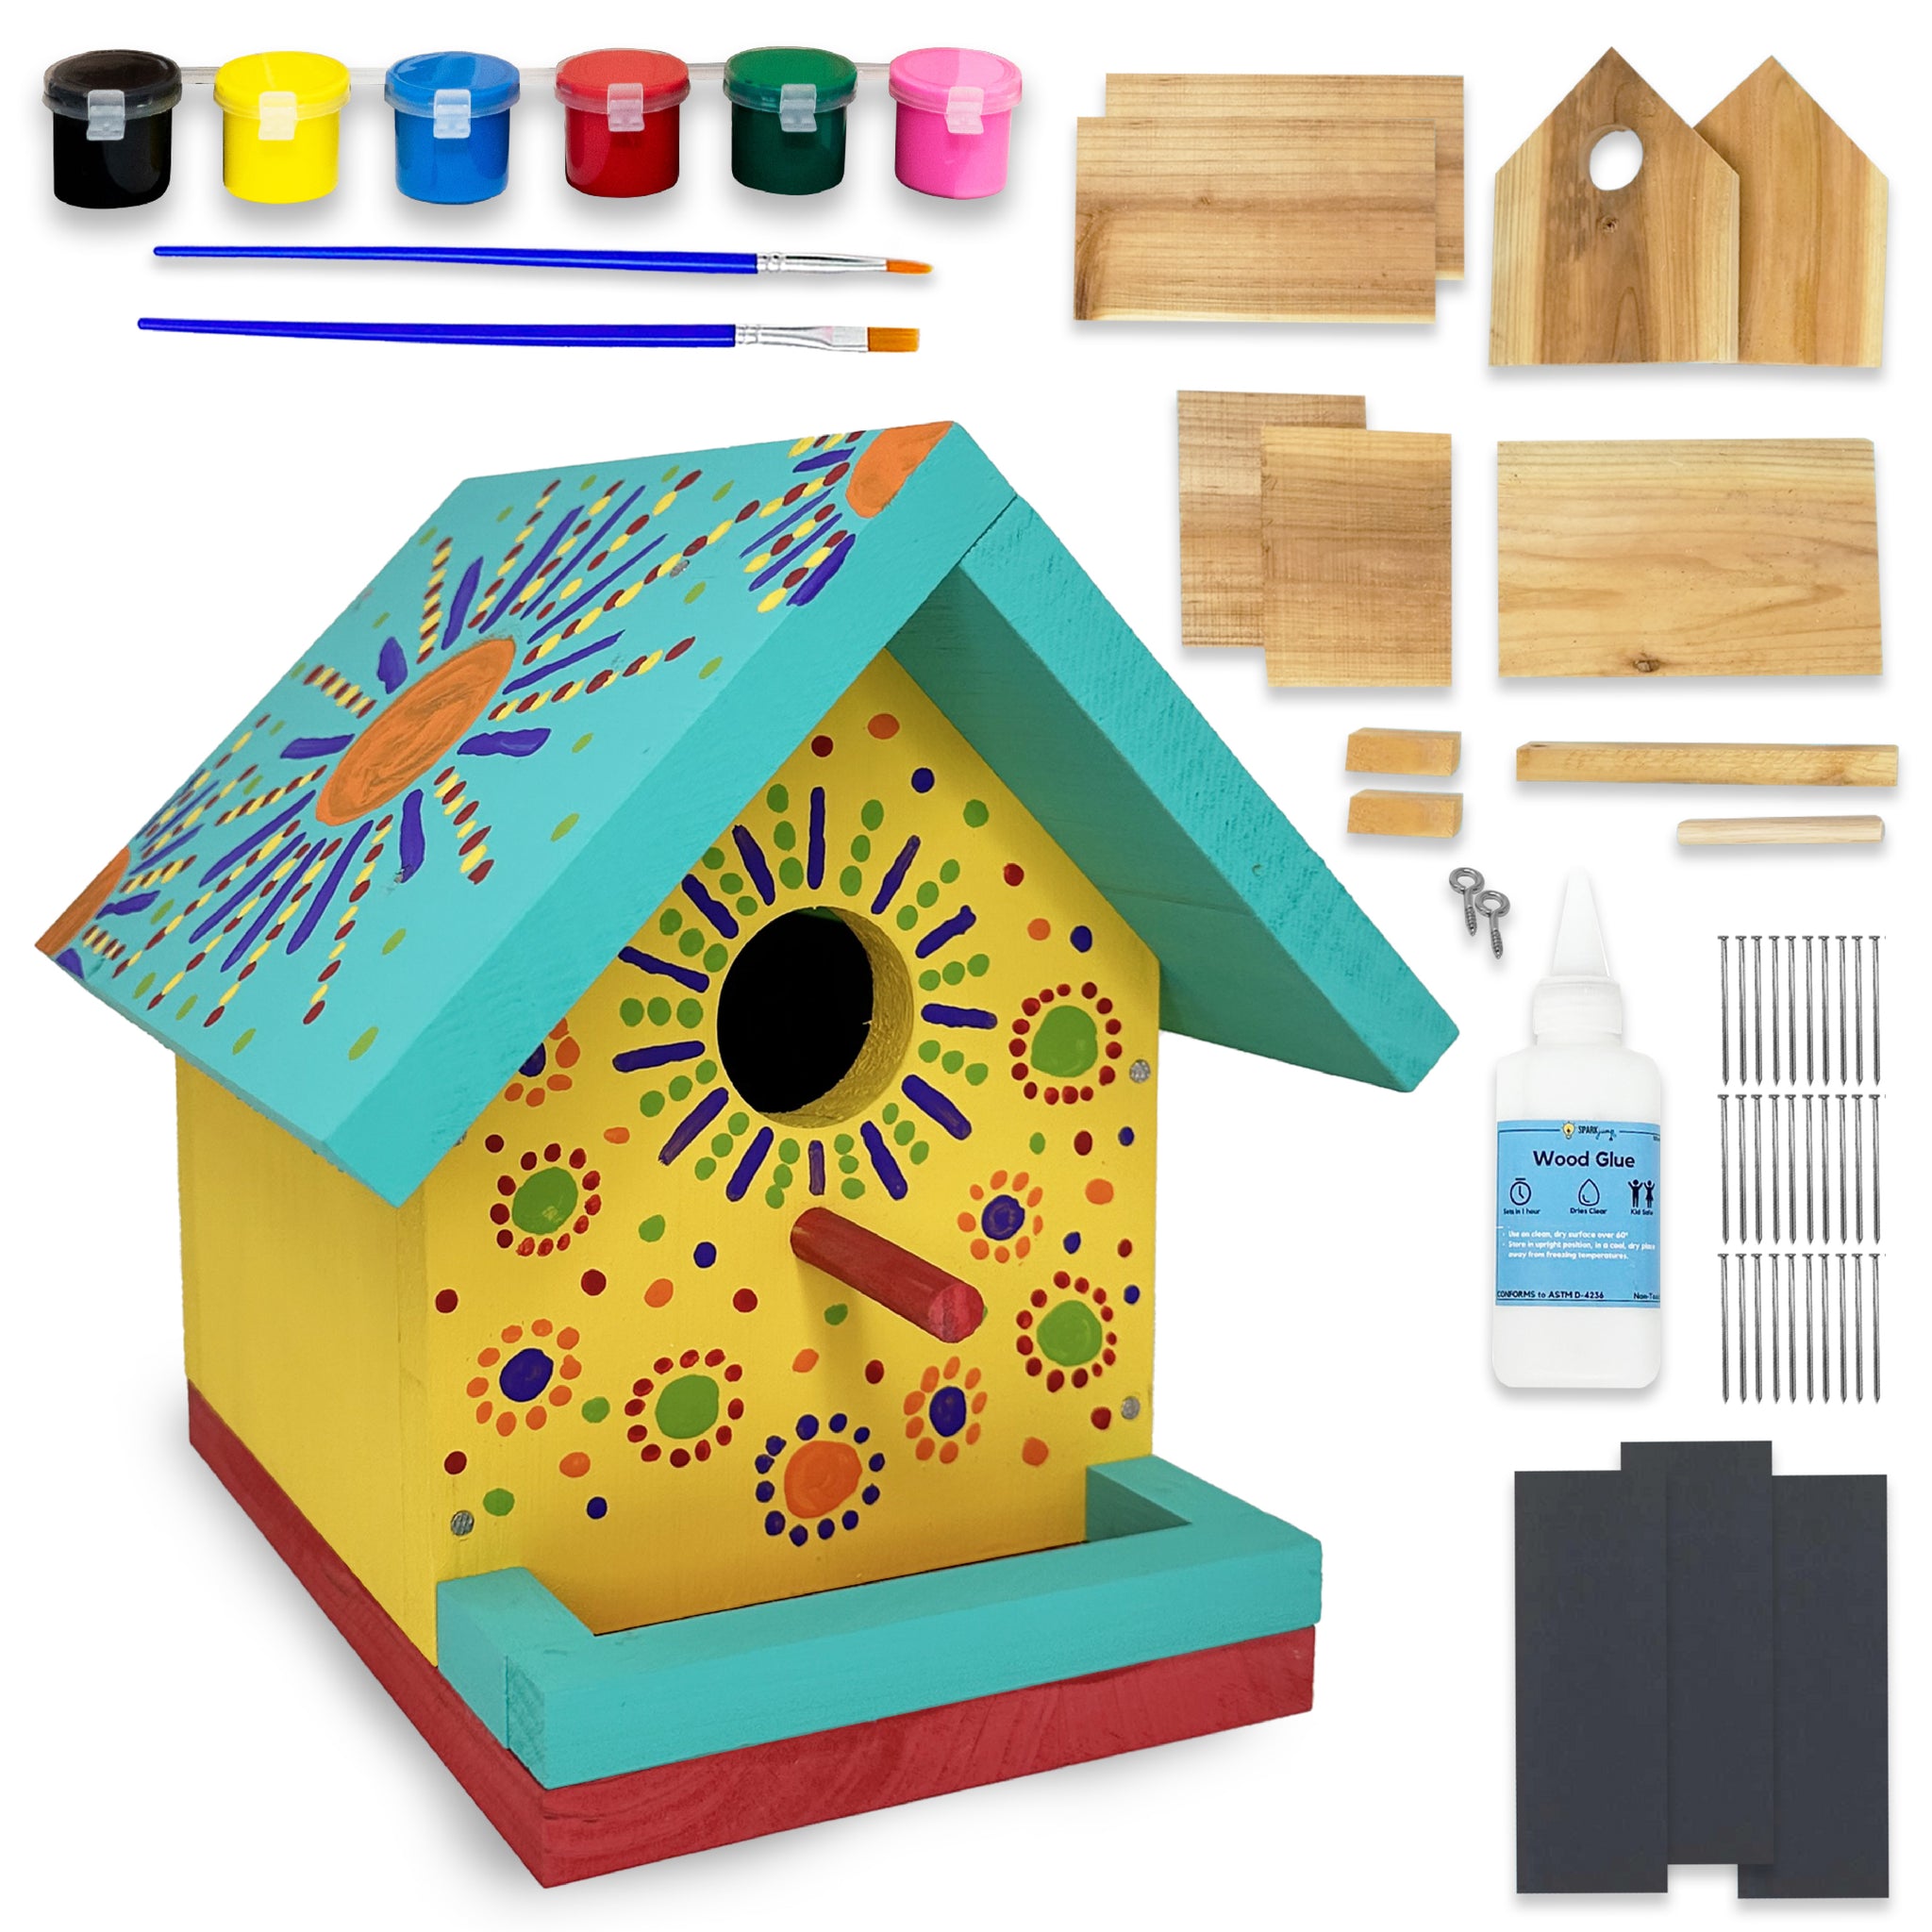 9 DIY Bird House Kits For Children to Build - Wood Birdhouse Kits For Kids  to Paint - Unfinished Wood Bird Houses to Paint for Kids - Wood Craft